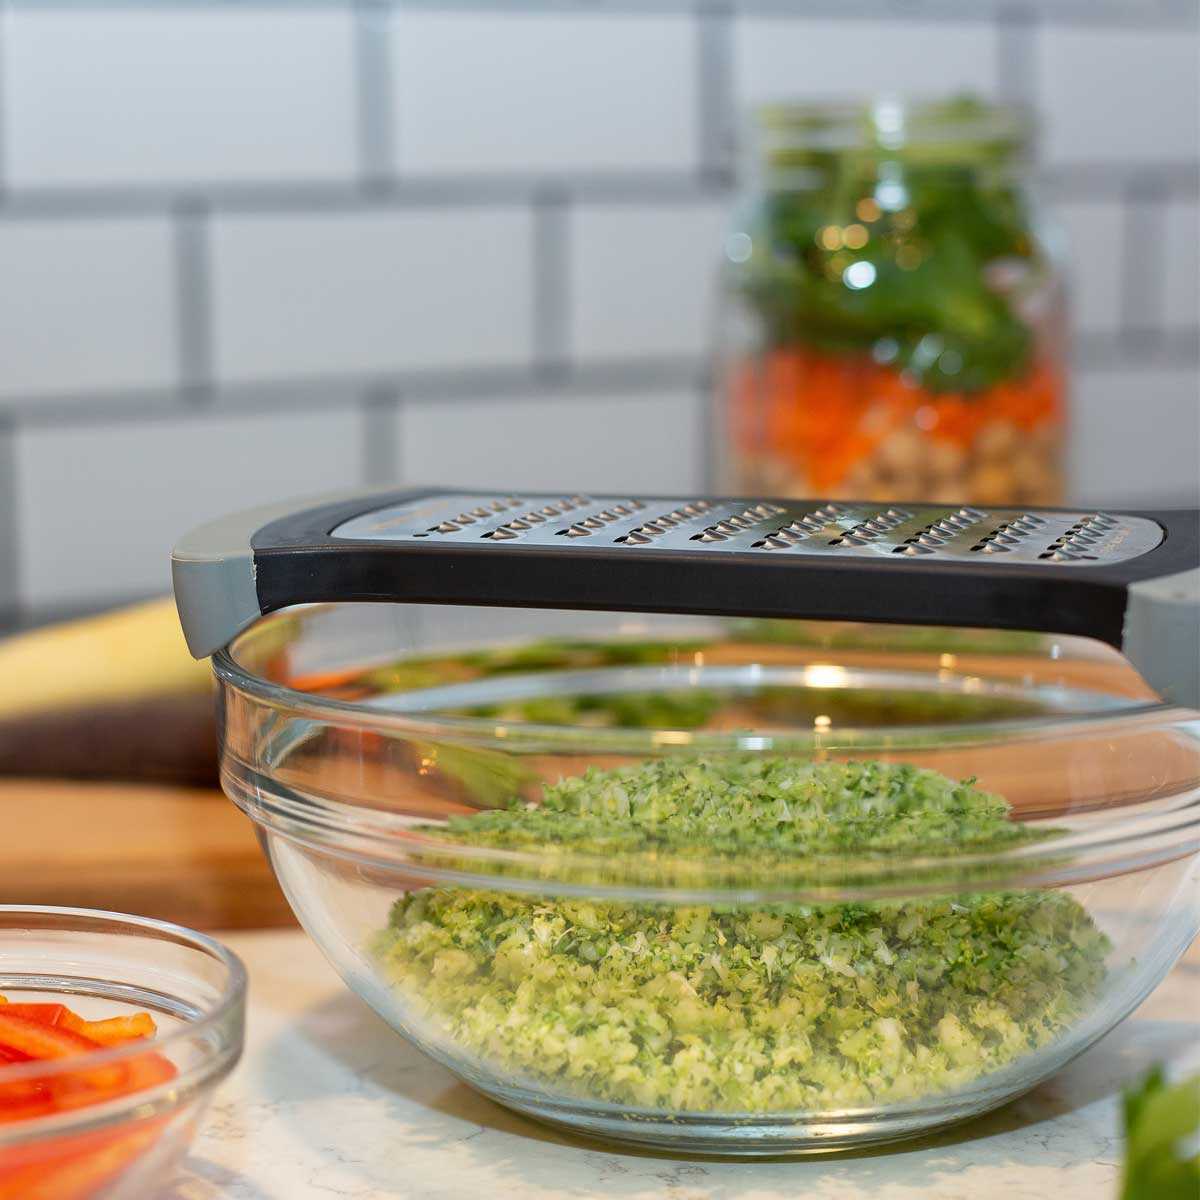 Microplane Mixing Bowl Grater, Extra Coarse